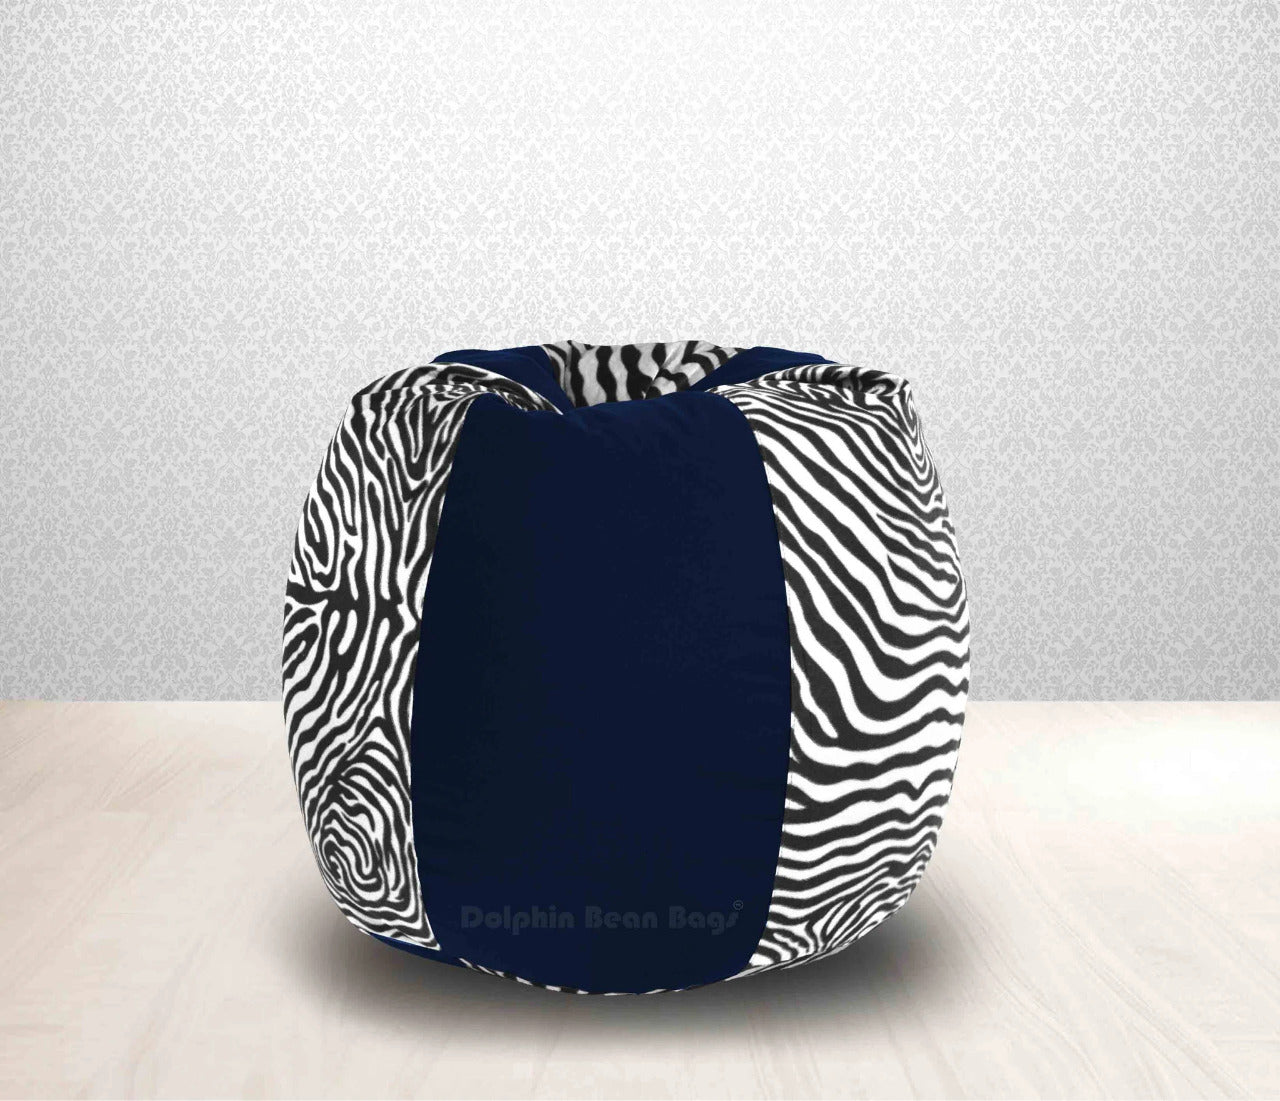 Bean Bag : XL N.Blue/Zebra(Blk-White)-FABRIC-FILLED & WASHABLE (with Beans)